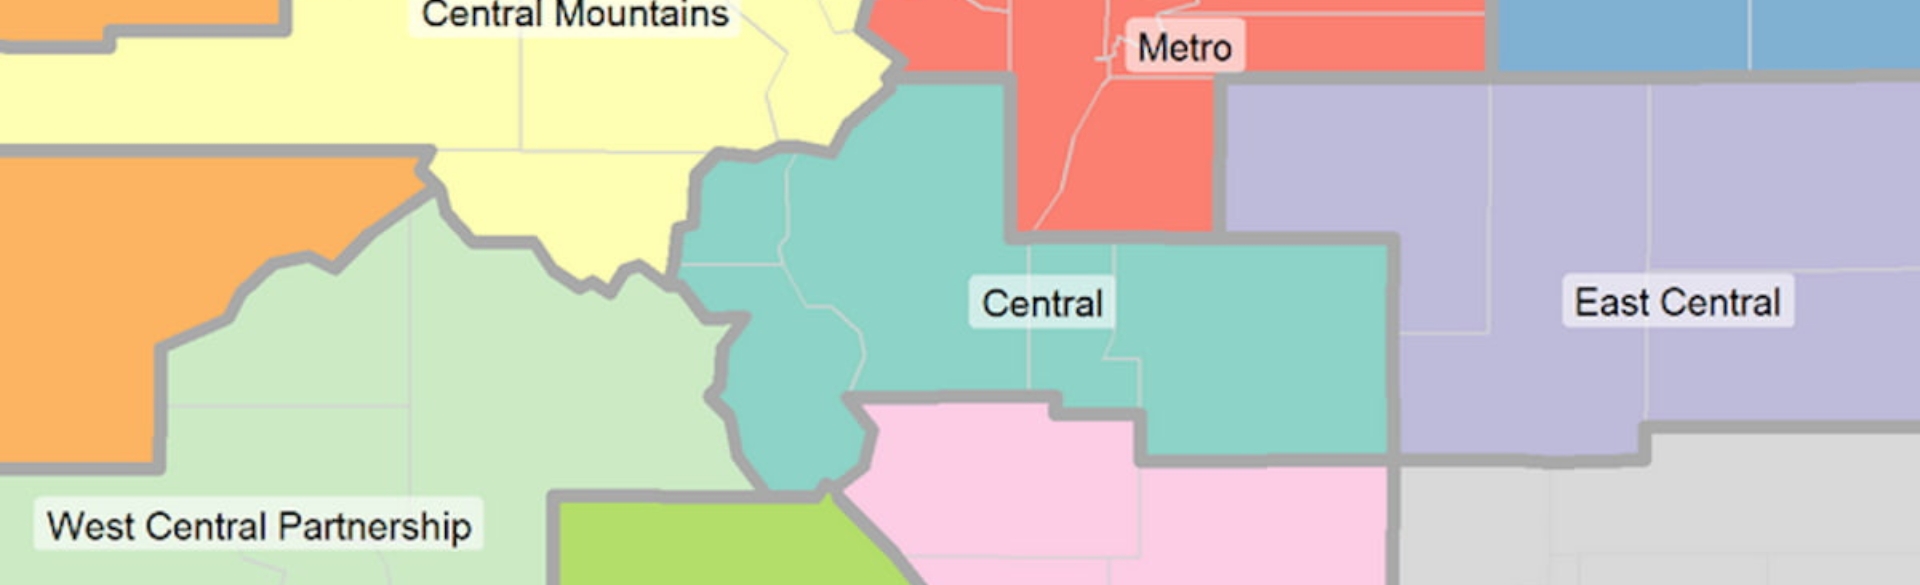 Map of areas of Colorado: Central Mountains, Metro, East Central, Central, West Central Partnerships